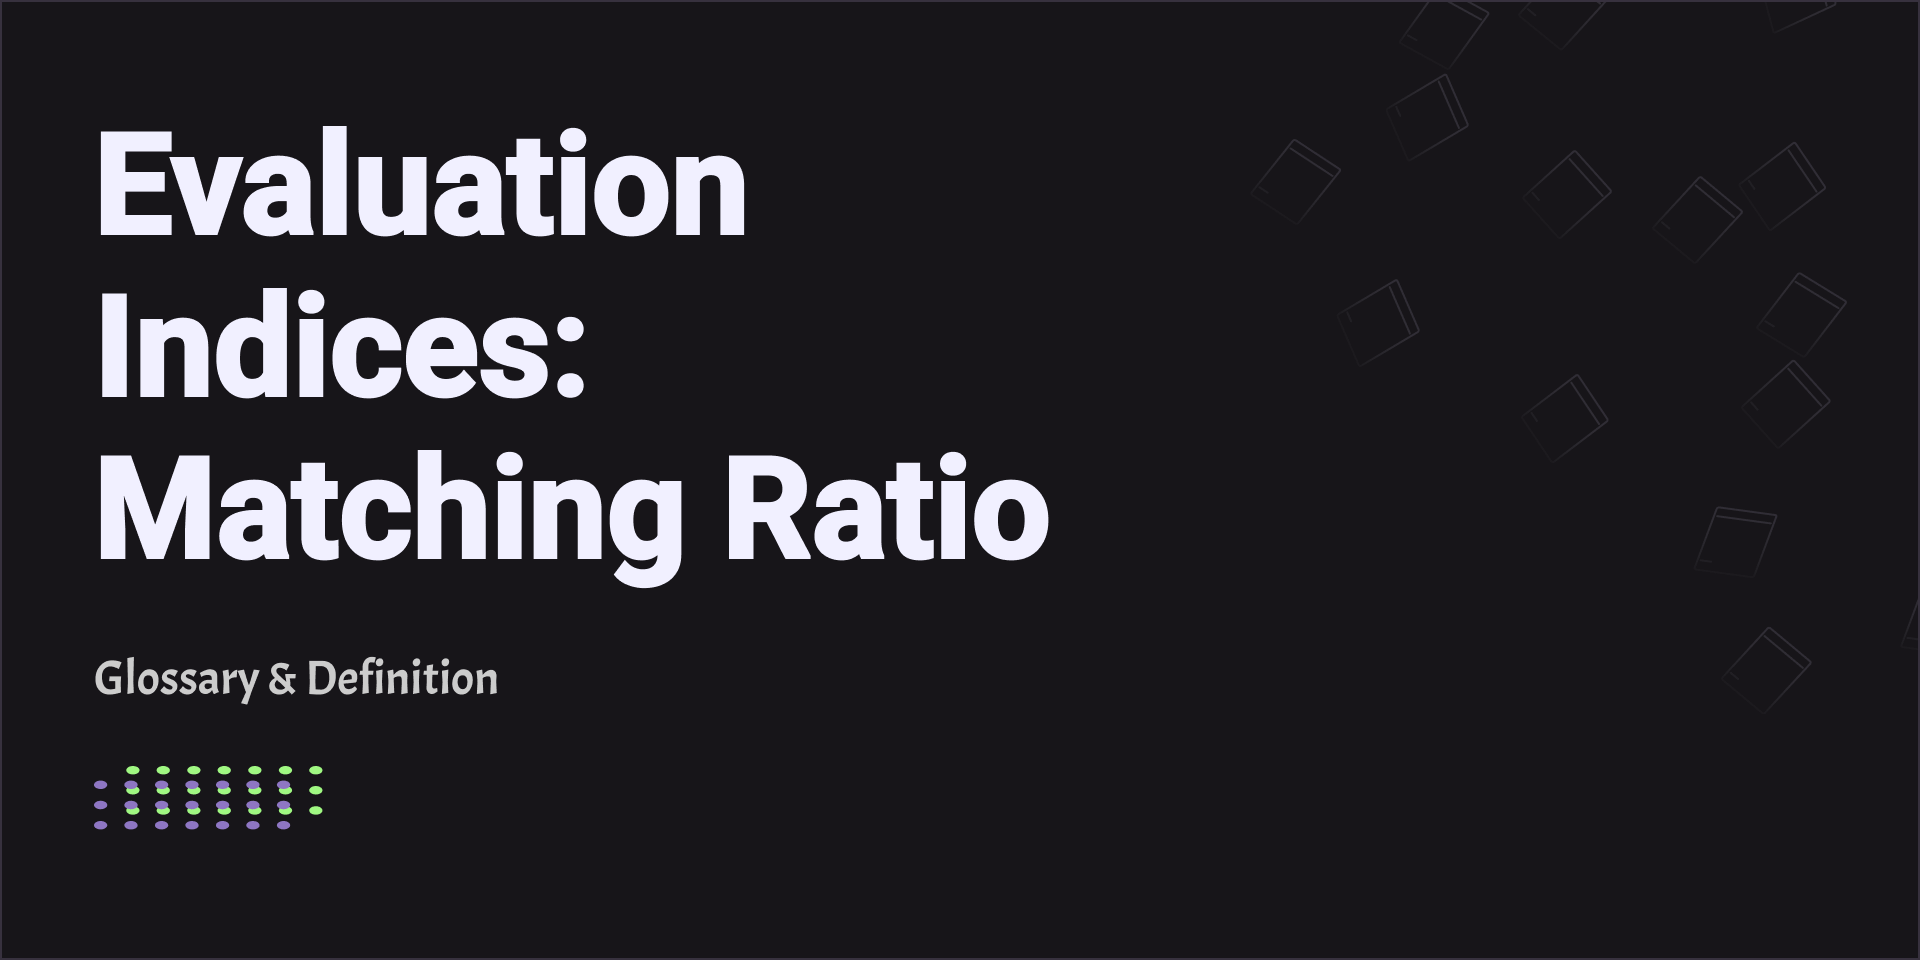 Evaluation Indices: Matching Ratio